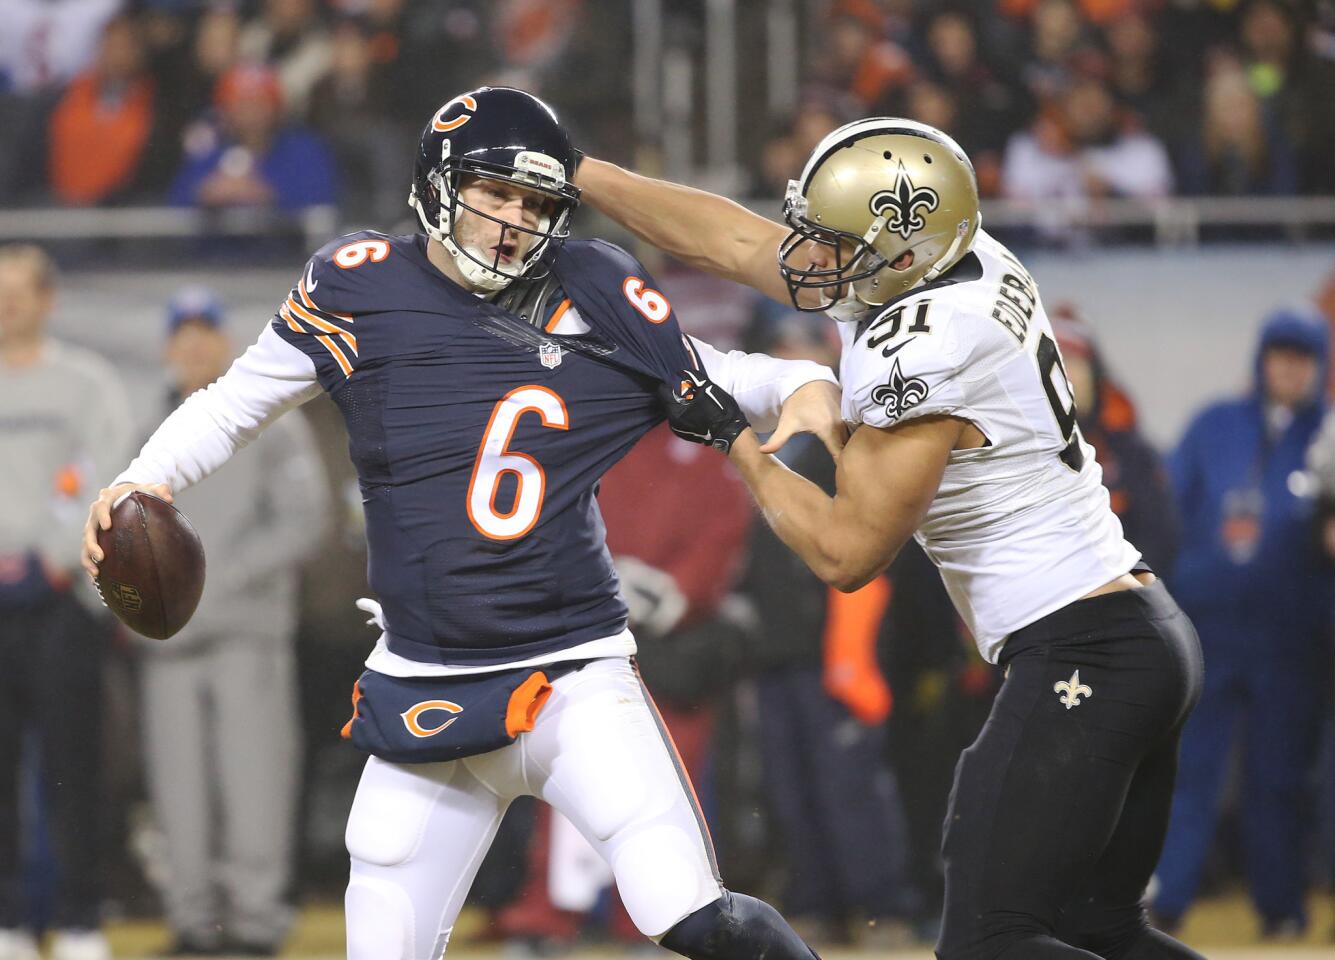 Bears quarterback Jay Cutler is dragged down by the Saints' Kasim Edebali in the second quarter.